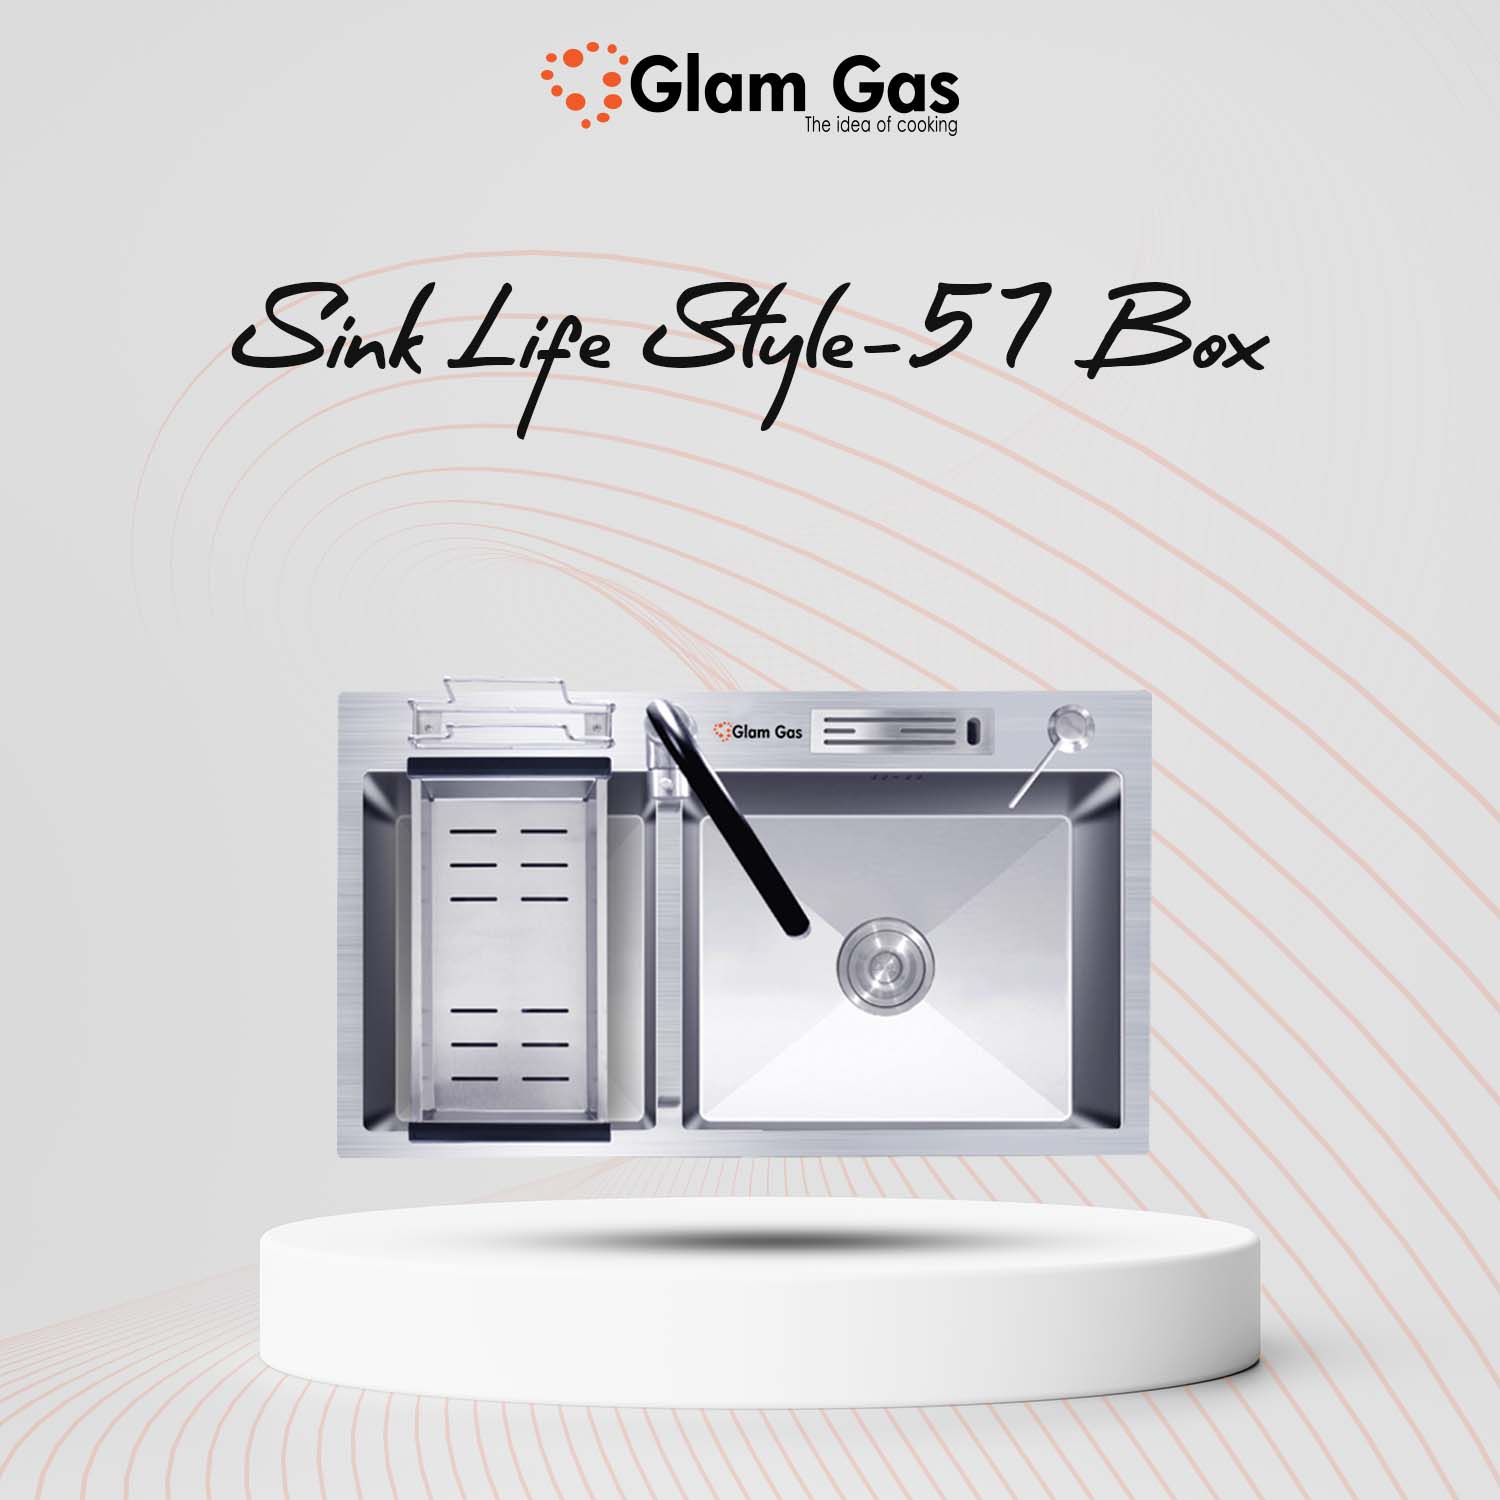 Buy Now Glamgas Life Style 57 Box | Built In Kitchen Sink Price in Pak